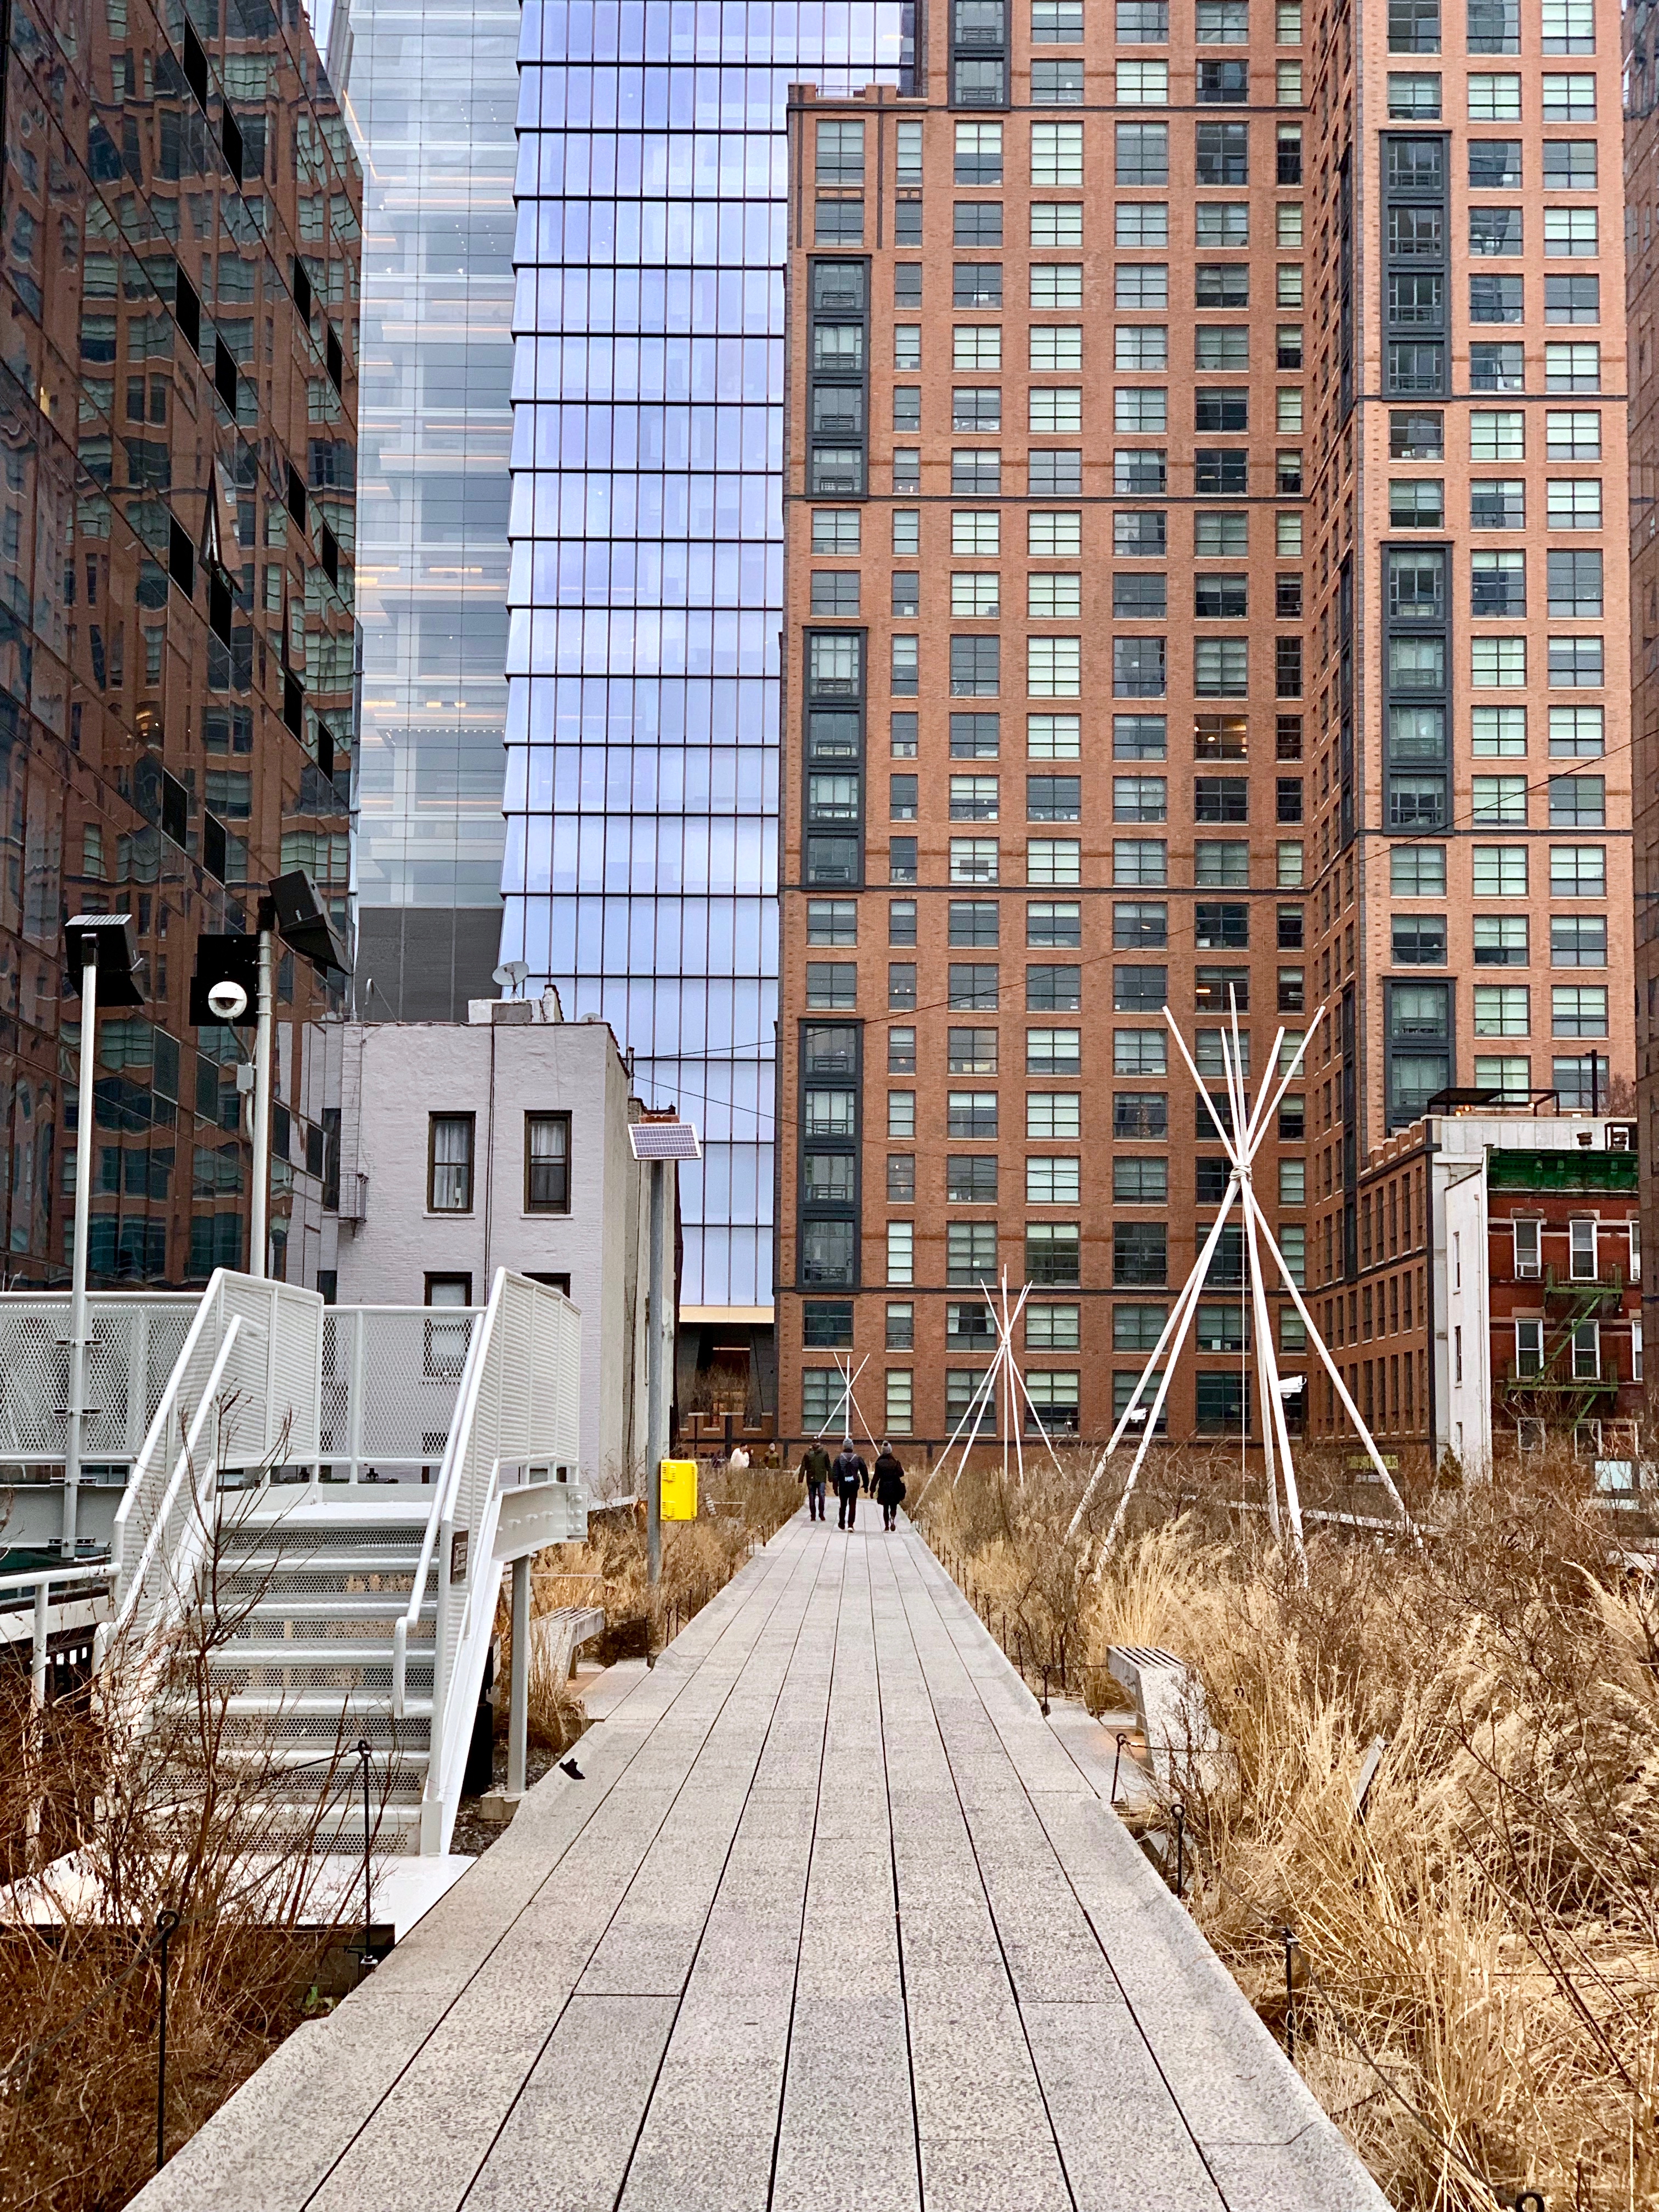 Walking the <a href="https://www.thehighline.org/">High Line</a>, with a view towards the <a href="https://www.hudsonyardsnewyork.com/about/building-hudson-yards/">Hudson Yards development</a>.